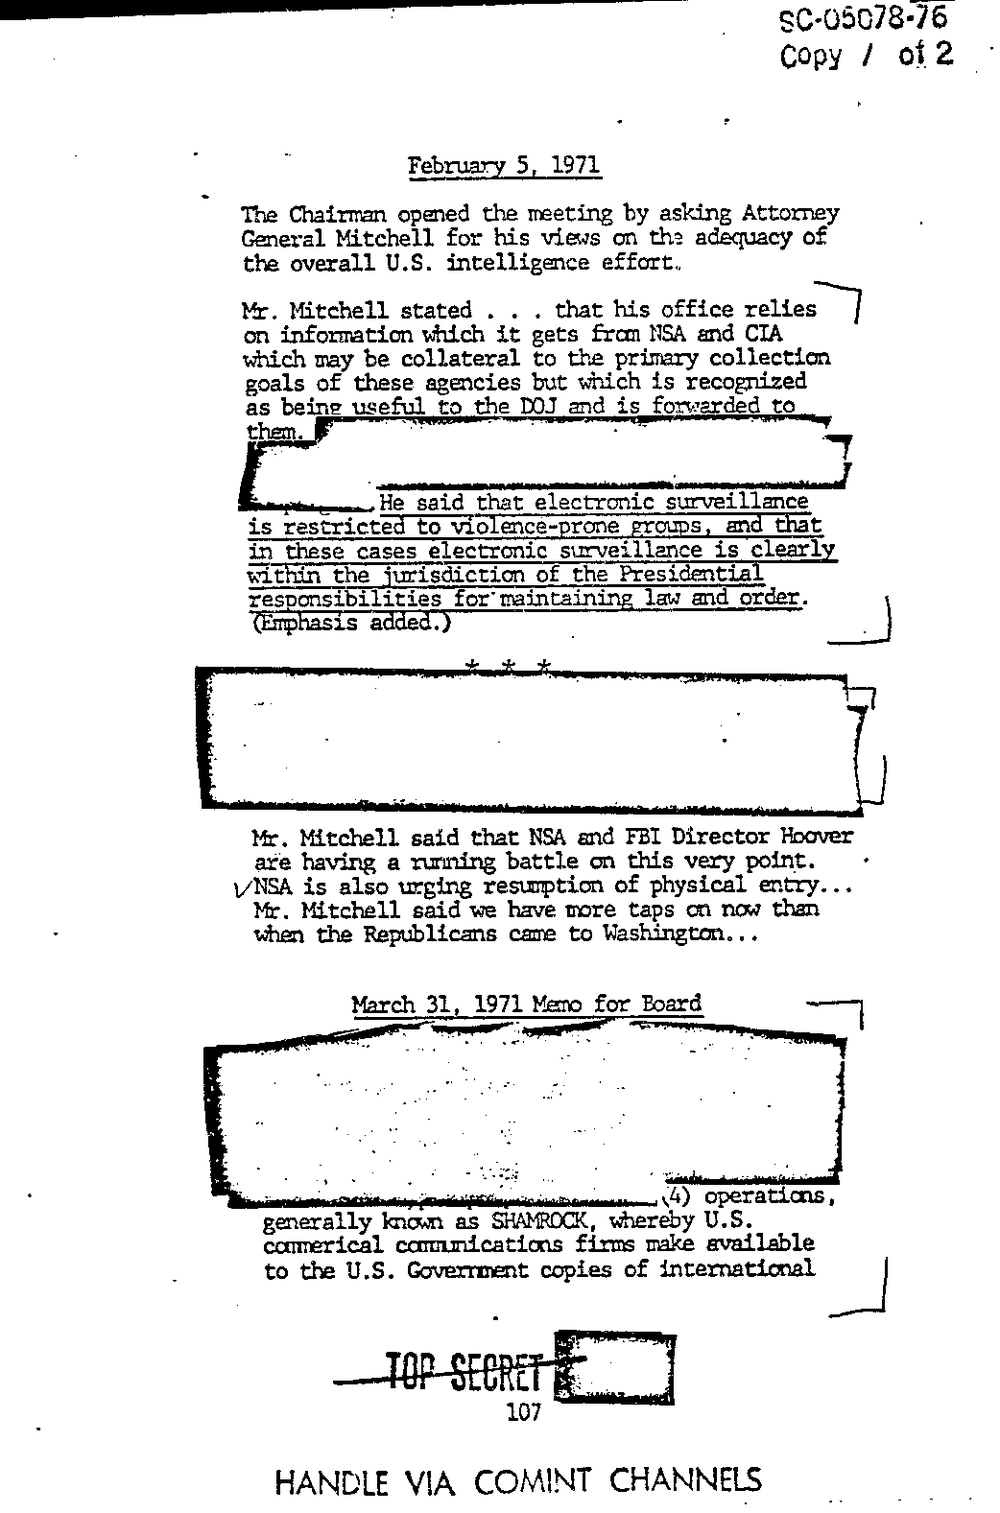 Page 115 from Report on Inquiry Into CIA Related Electronic Surveillance Activities